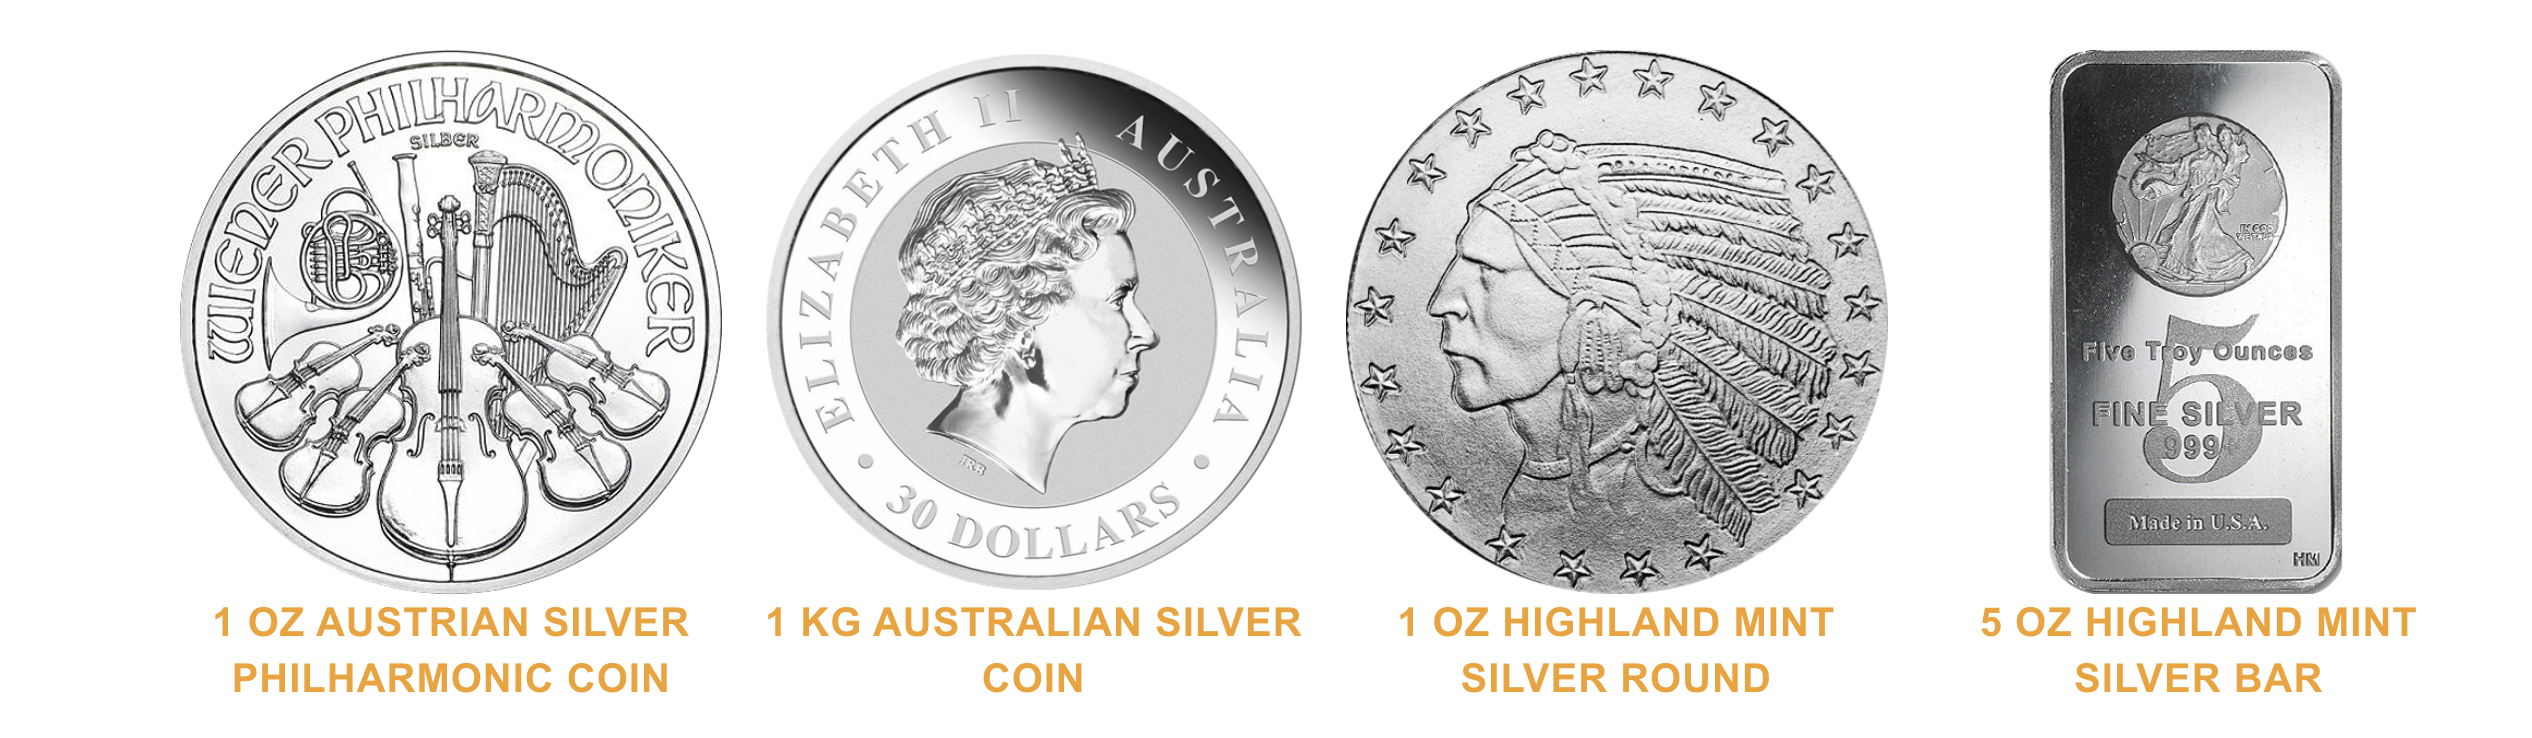 Noble gold silver coins